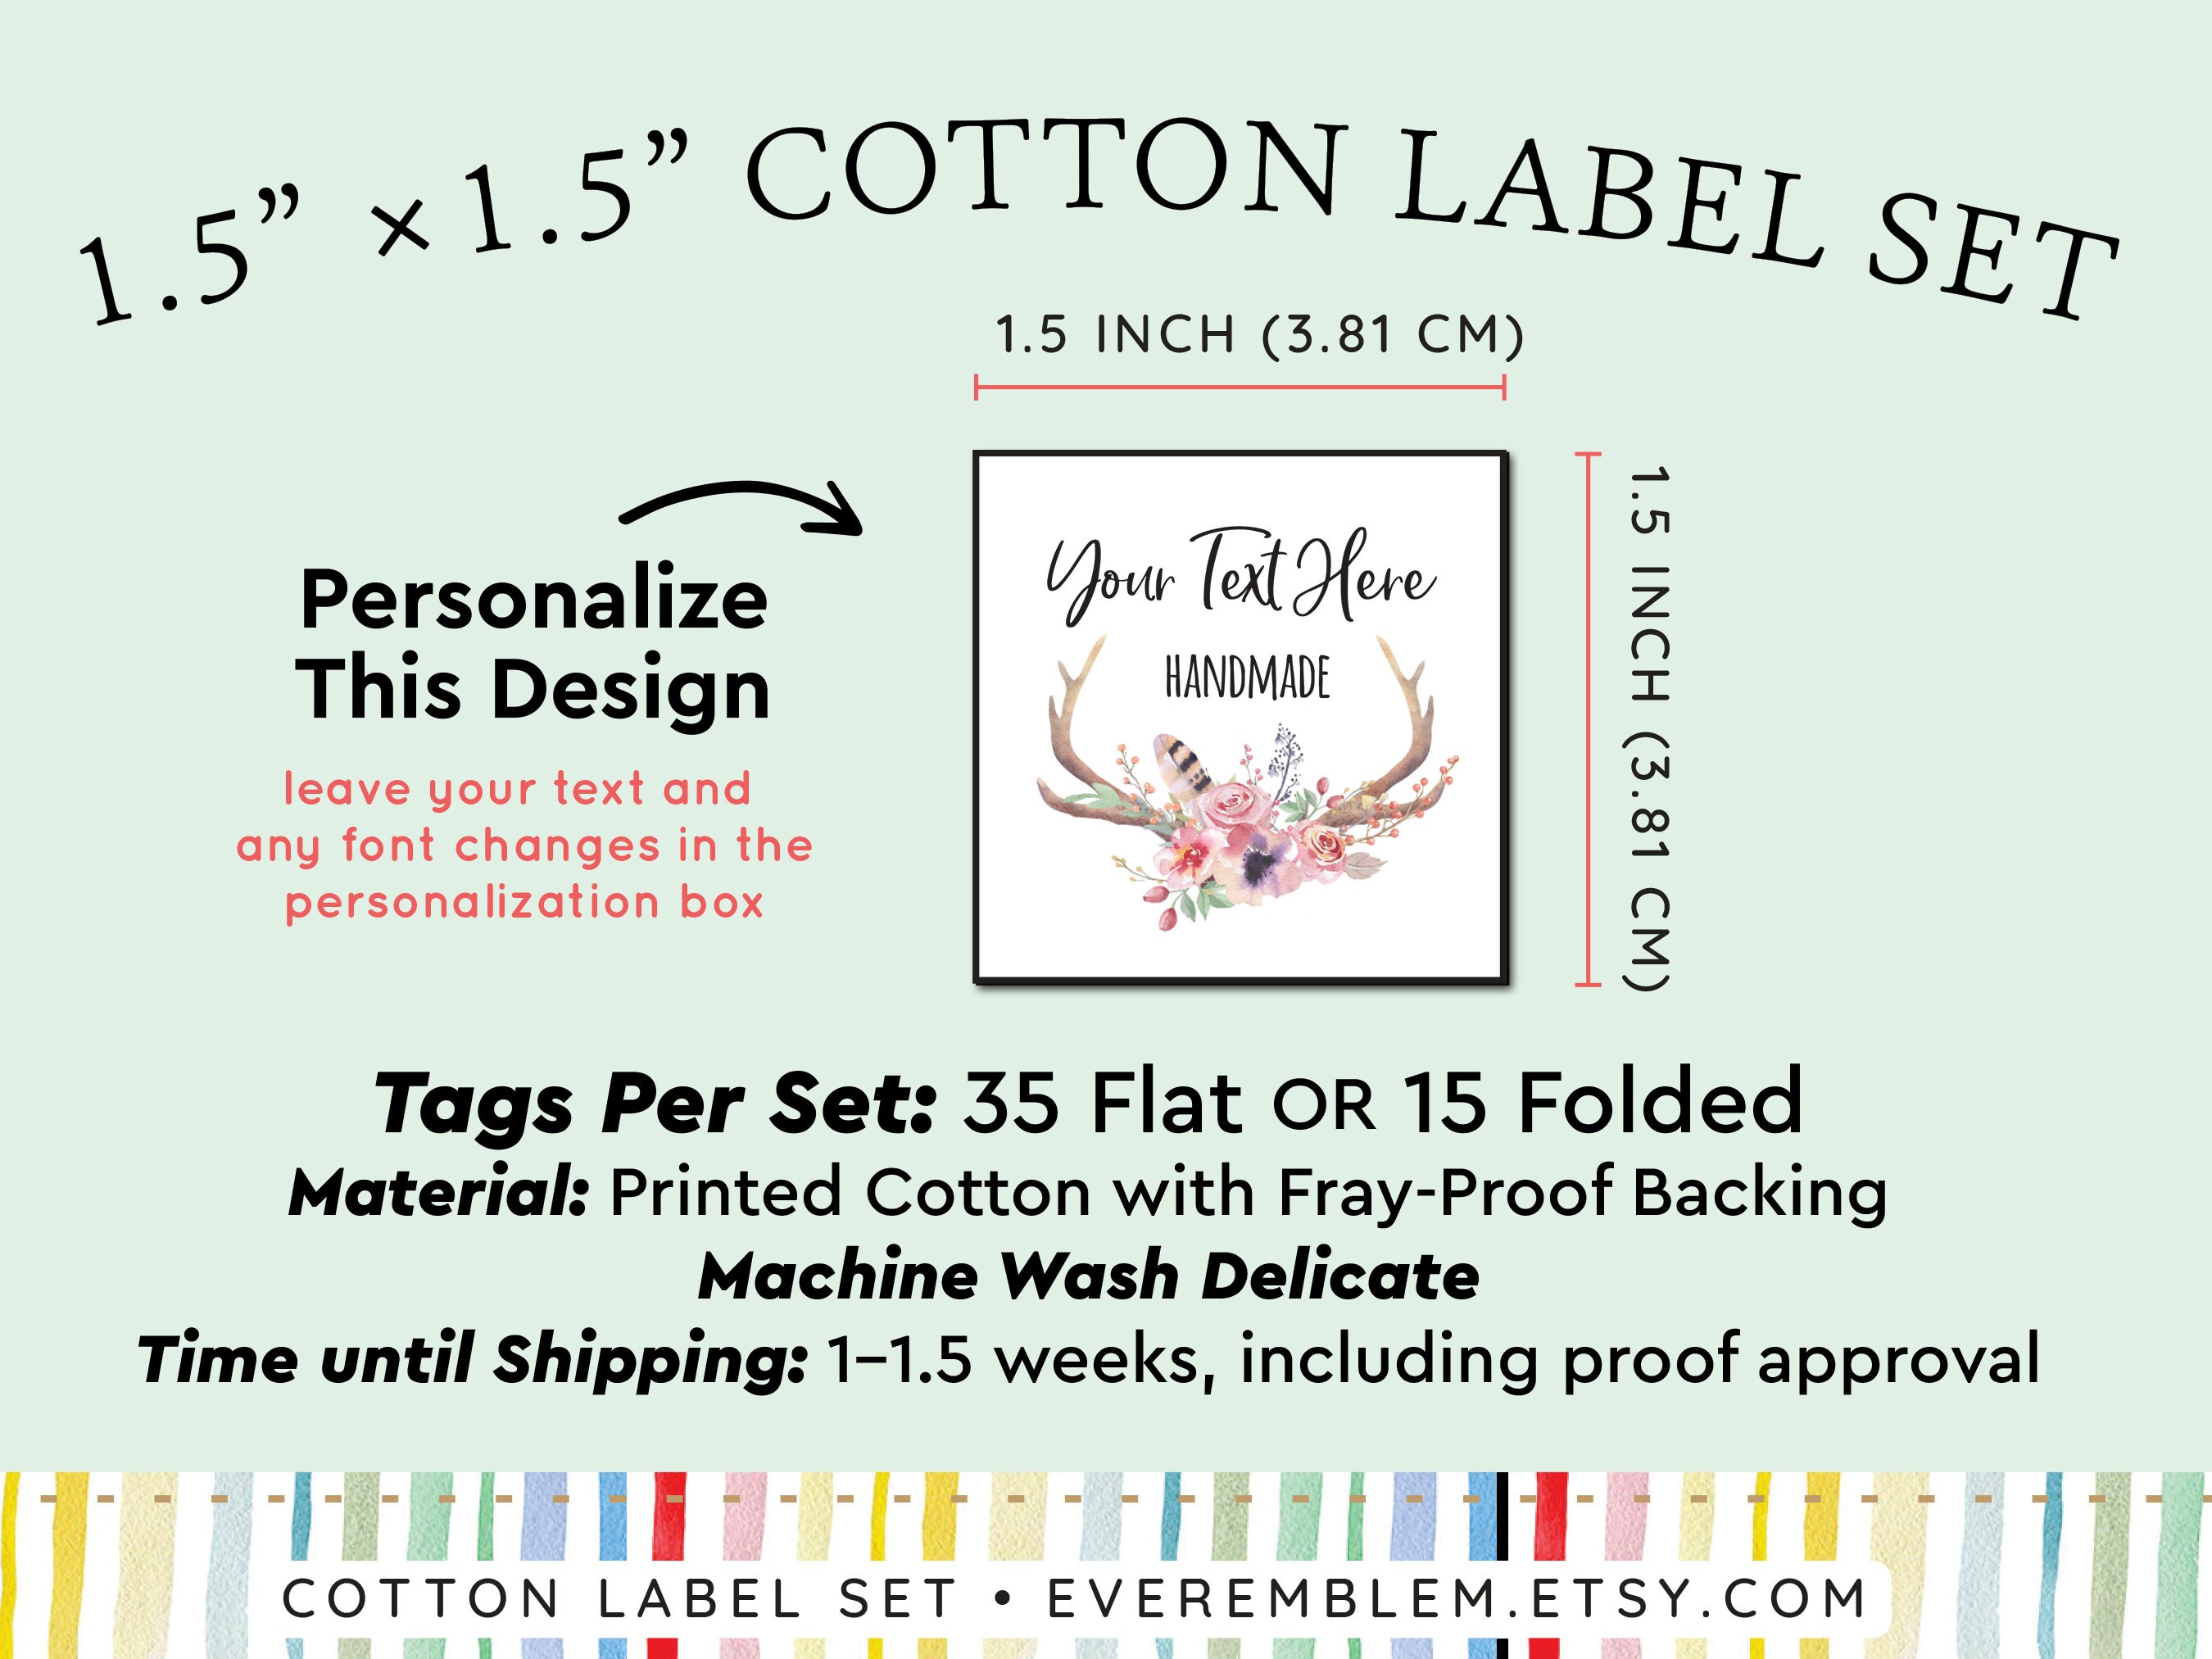 Personalized Crochet Labels for Handmade Items and Gifts on Organic Cotton  fabric Tags 